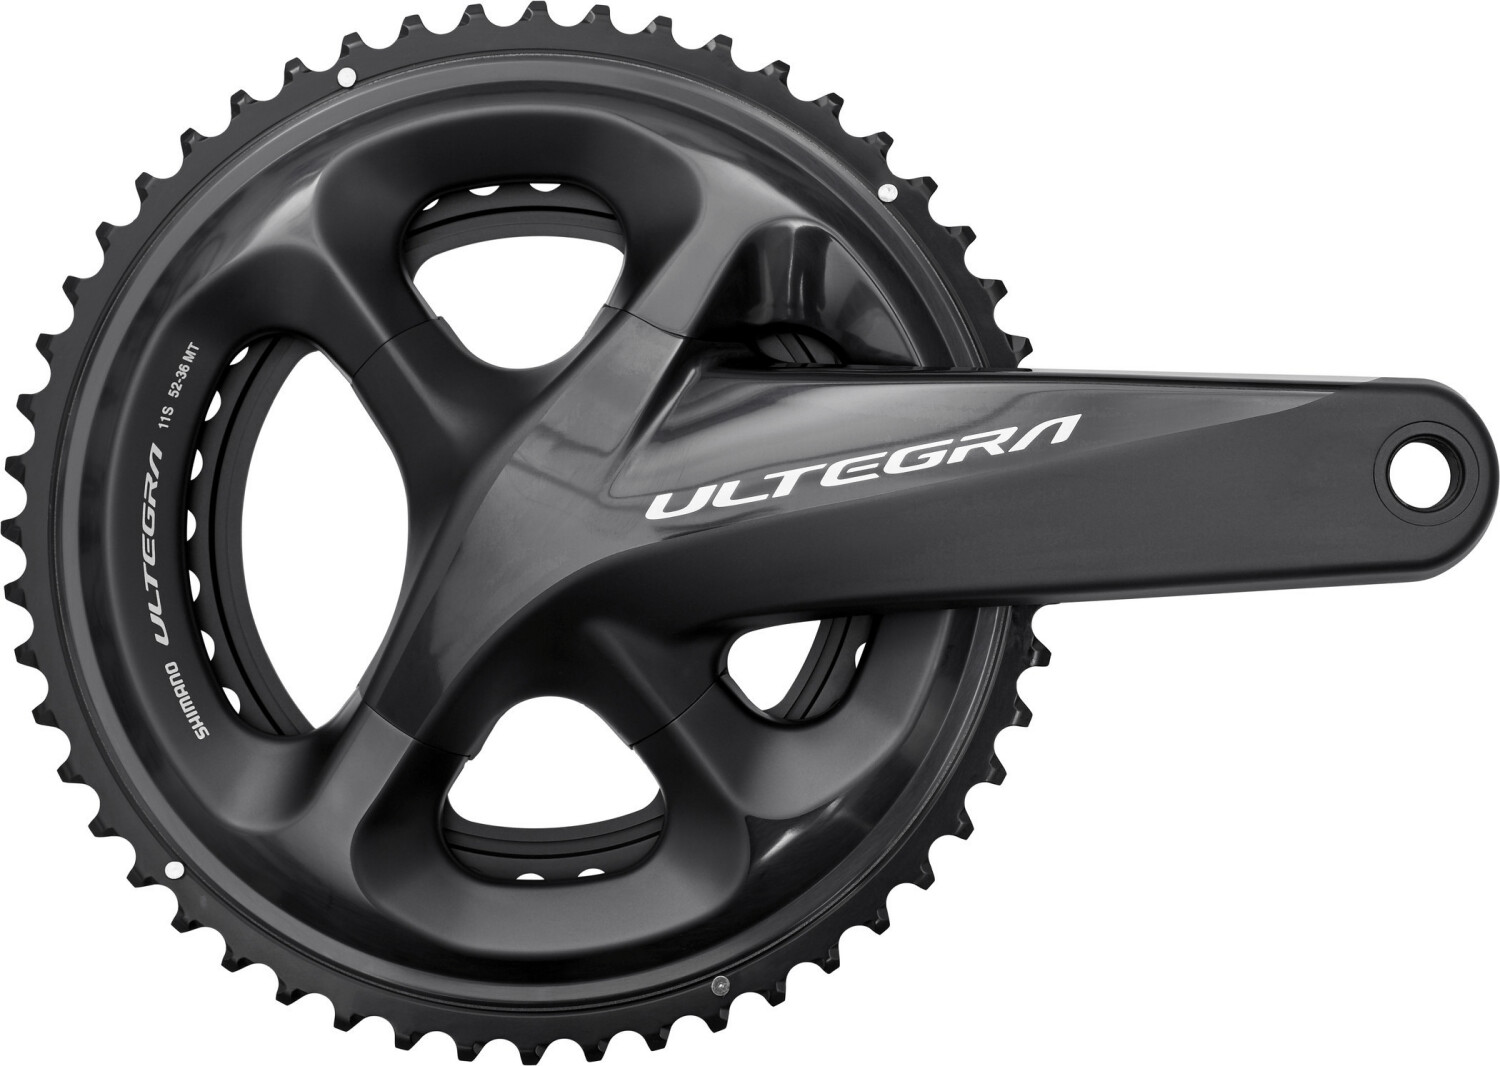 Buy Shimano Ultegra FC-R8000 (175) (52/36) from £188.99 (Today